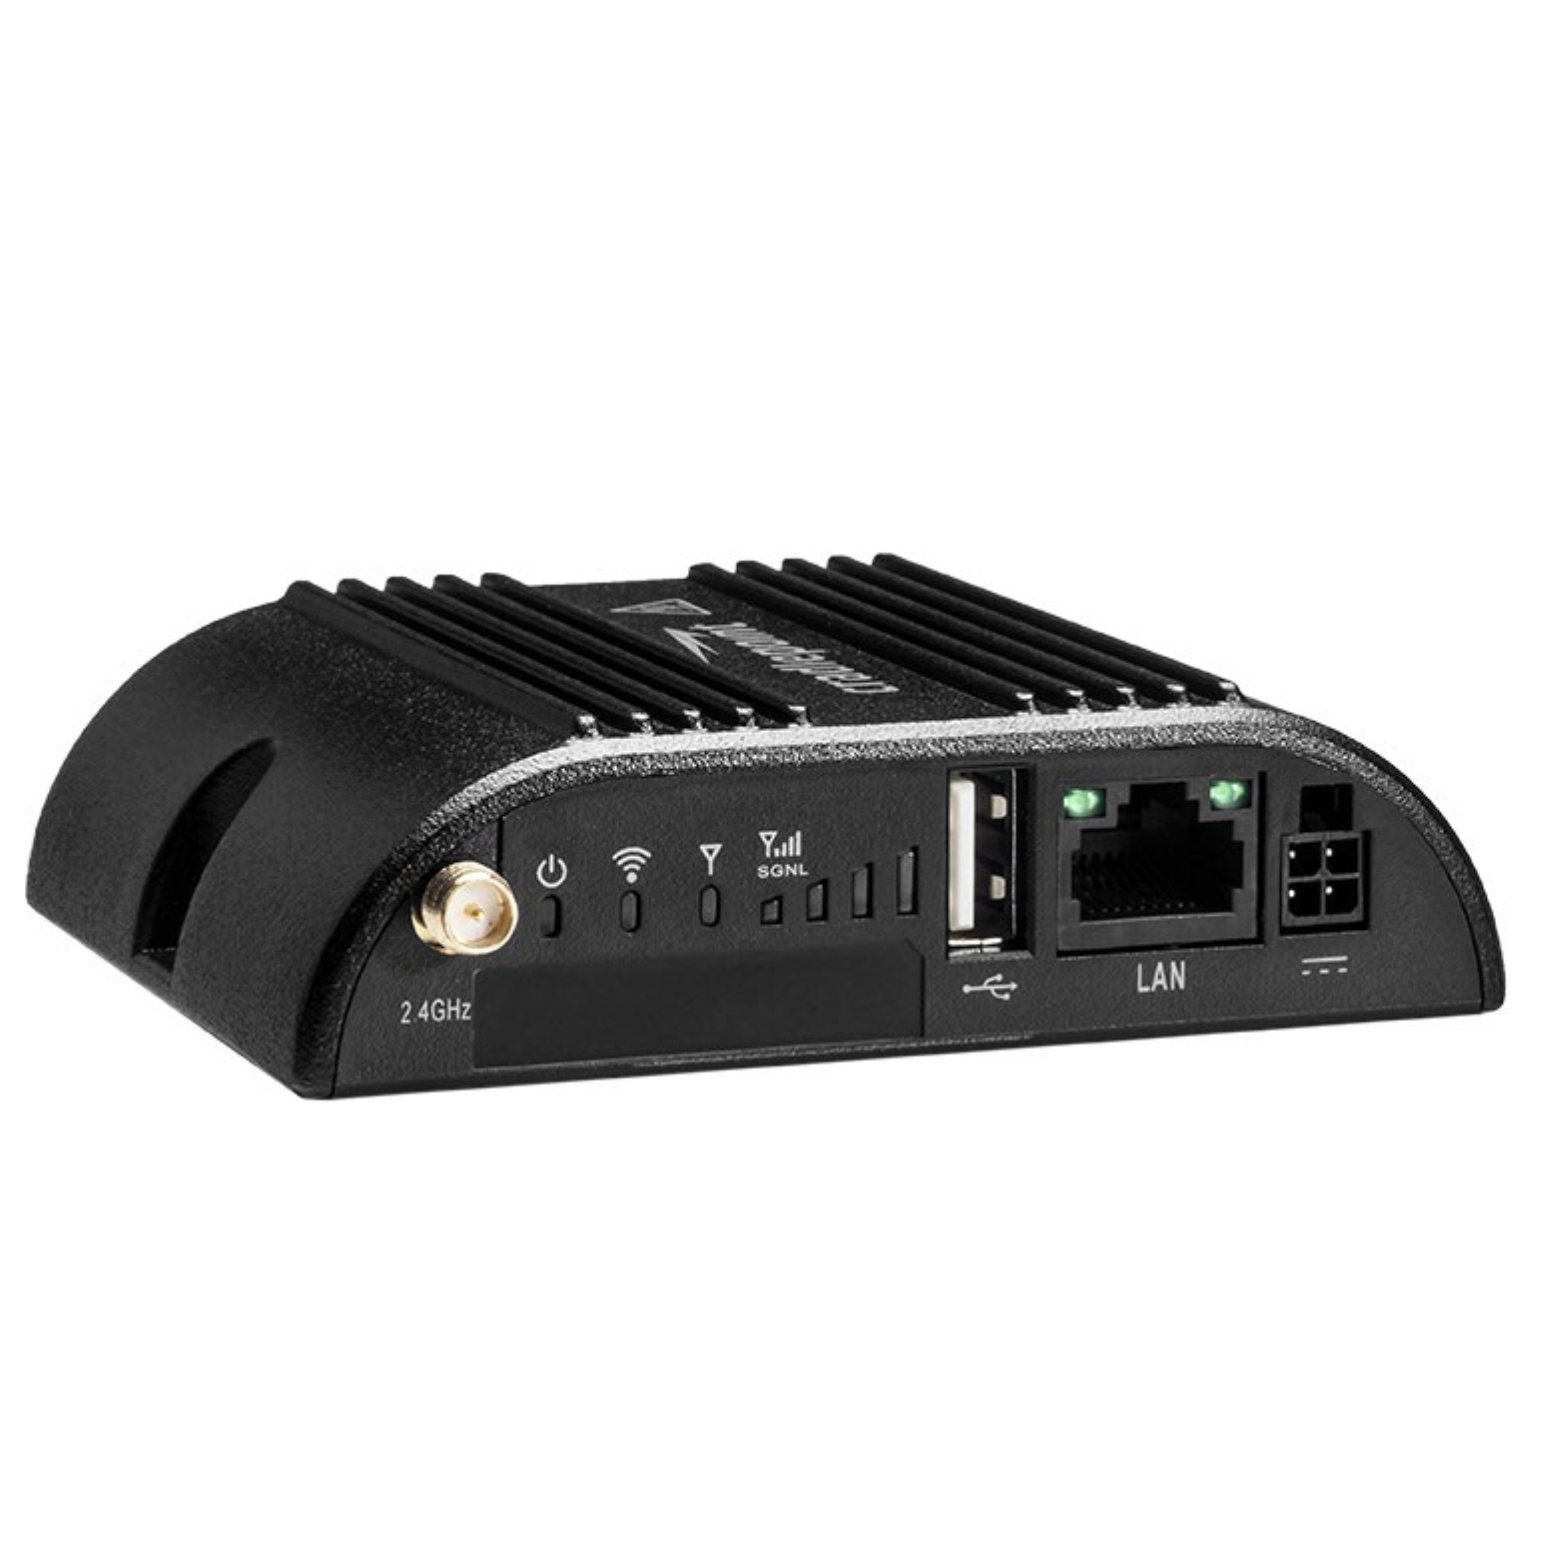 Cradlepoint R1900 Series 5G Ruggedized Router Endpoint